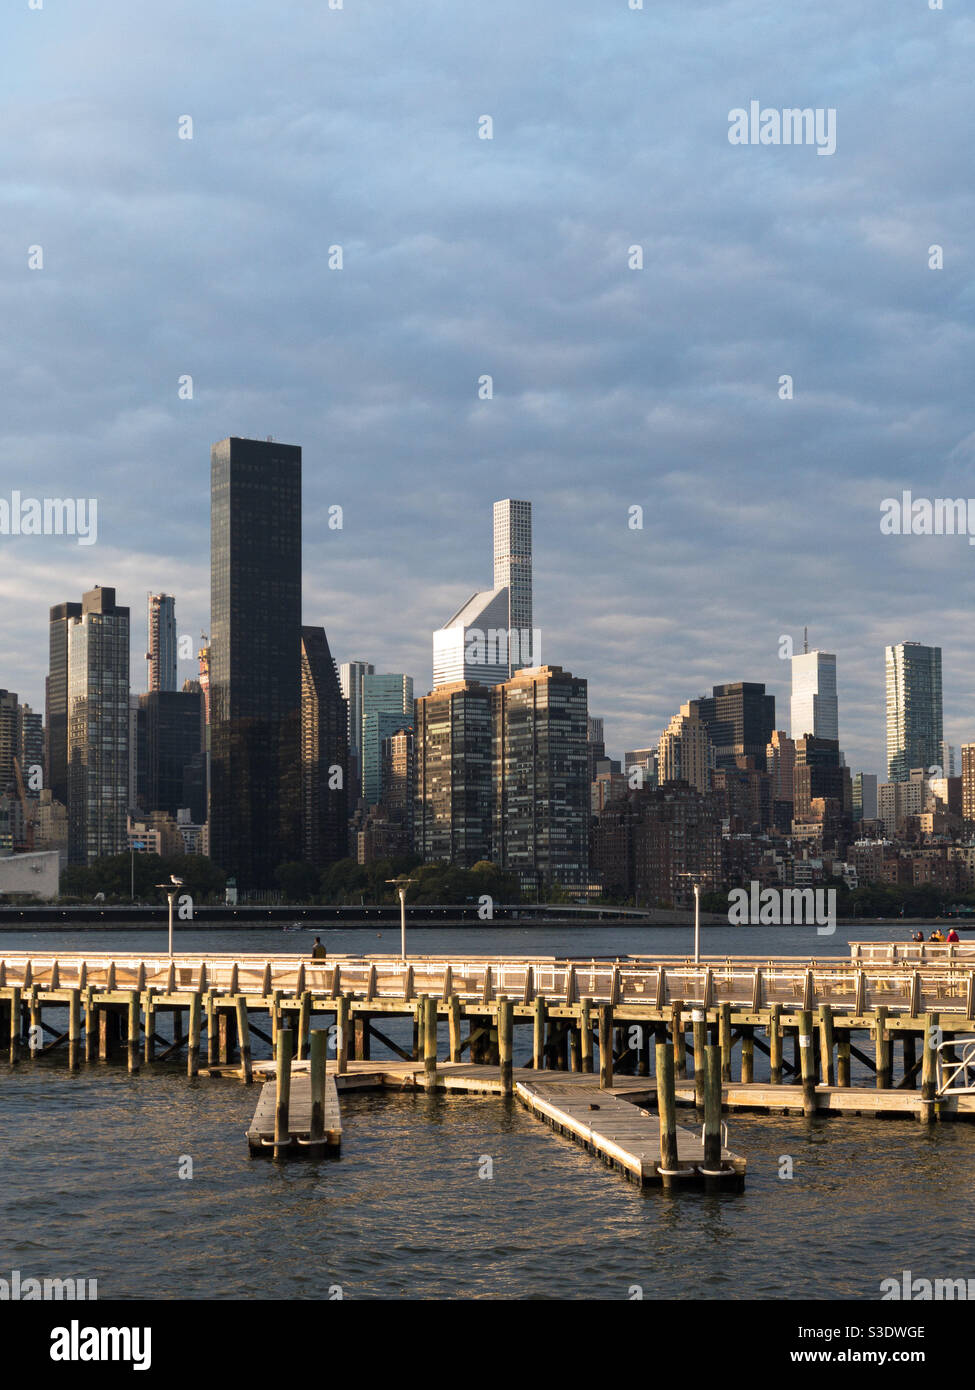 Fishers pier at the Gantry State plaza in Long Island city, Queens, and view over Manhattan upper East side Stock Photo